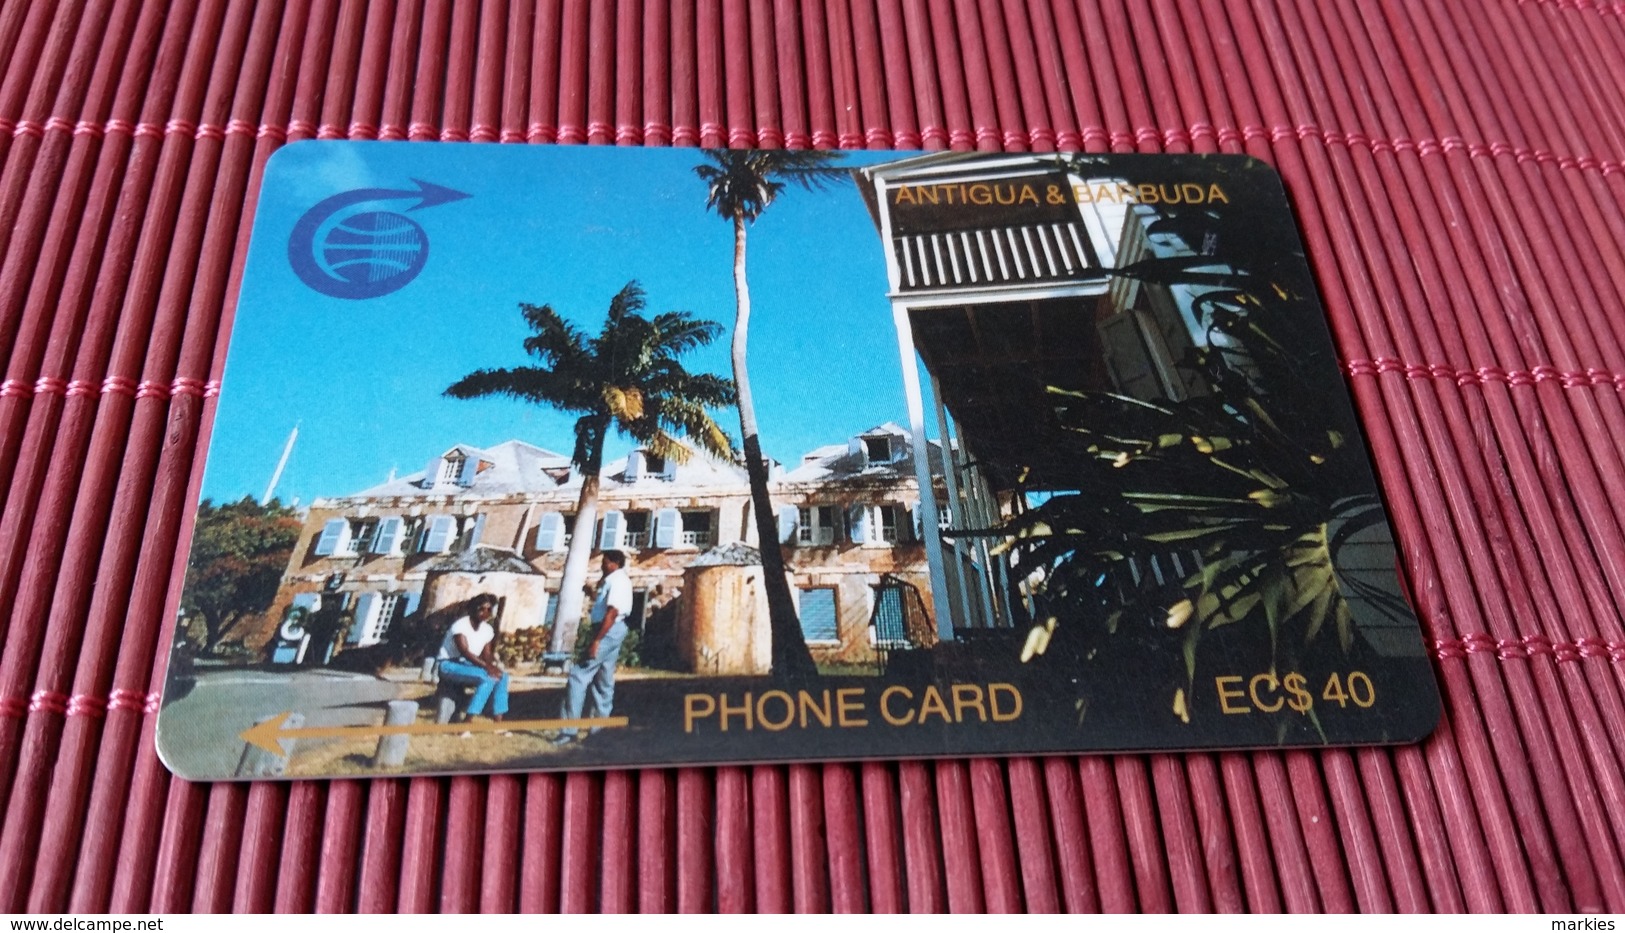 Antiga & Barbuda 40 $ Phonecard Number 3CATD  Used Not Perfect Some Scratches Of Damage Of Use See Scan Rare - Antigua U. Barbuda